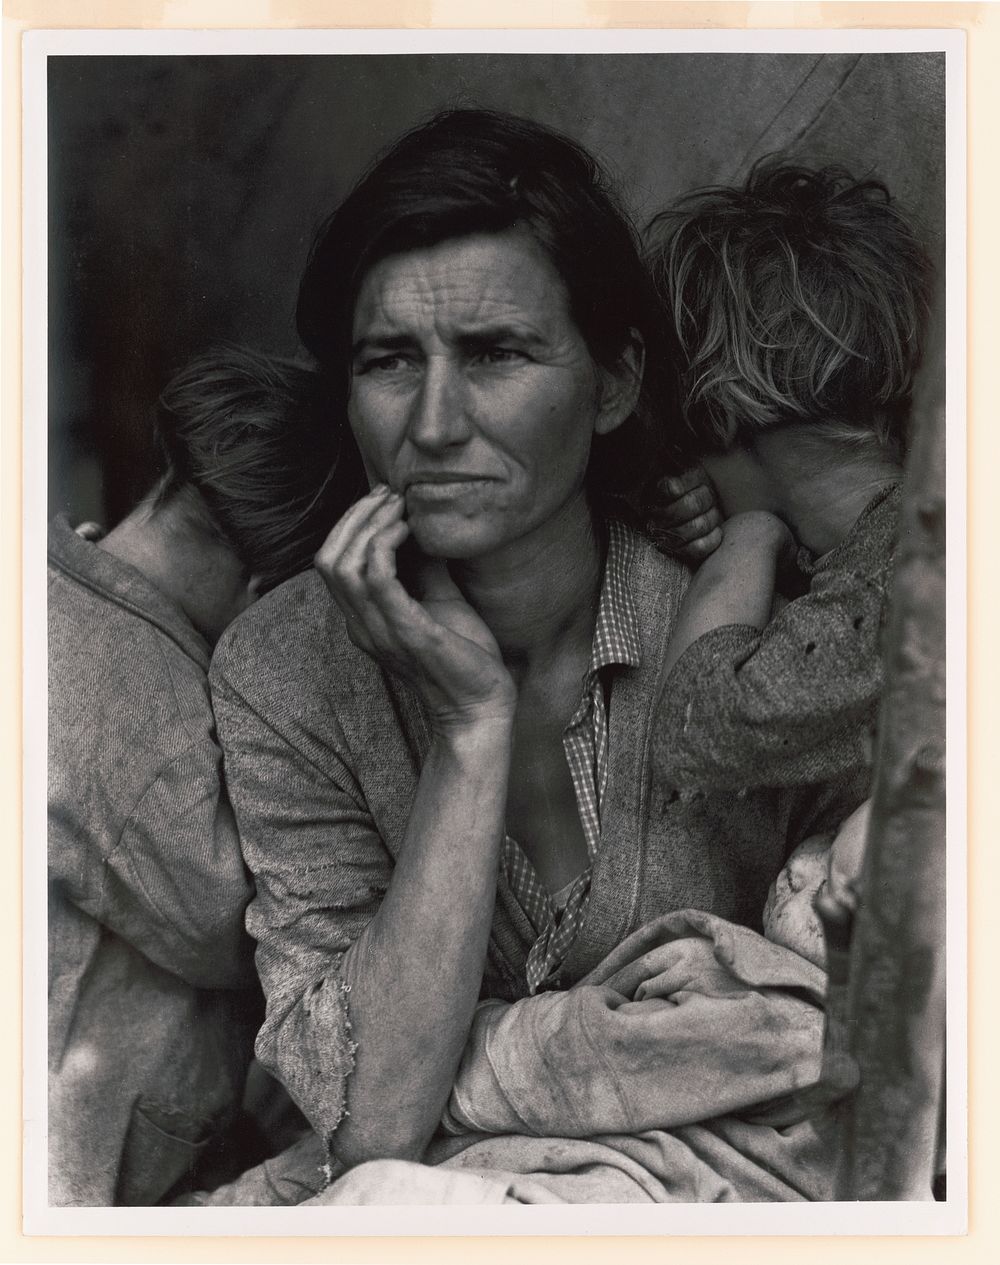 Destitute pea pickers in California. Mother of seven children. Age 32 by Dorothea Lange